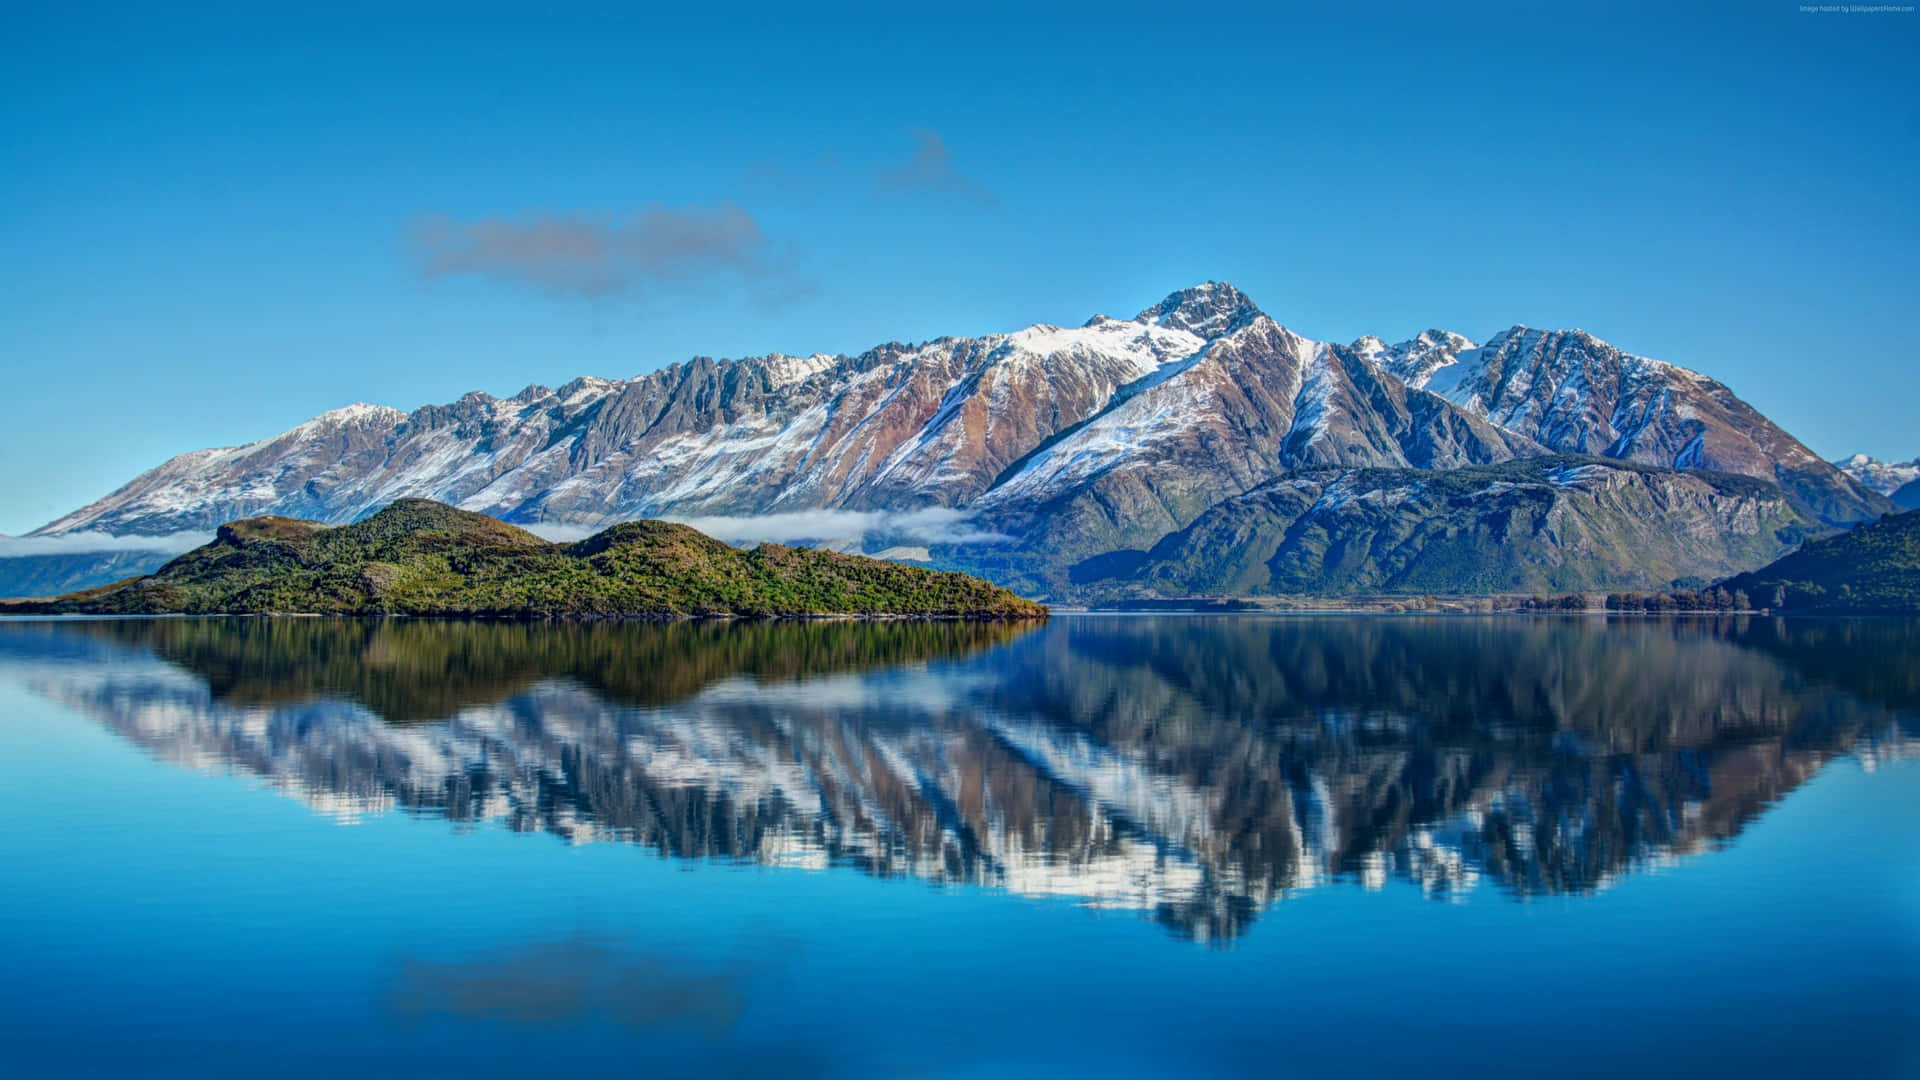 Take in the scenic beauty of New Zealand